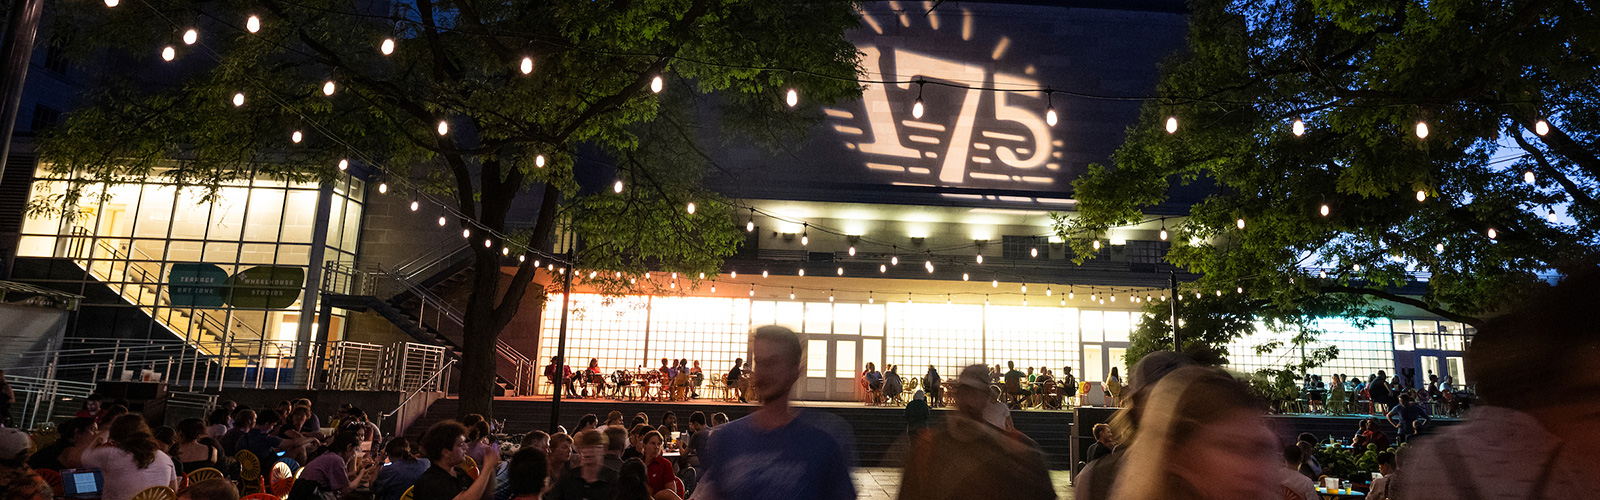 People on the Memorial Union Terrace with "175" projected on the side of a building behind them